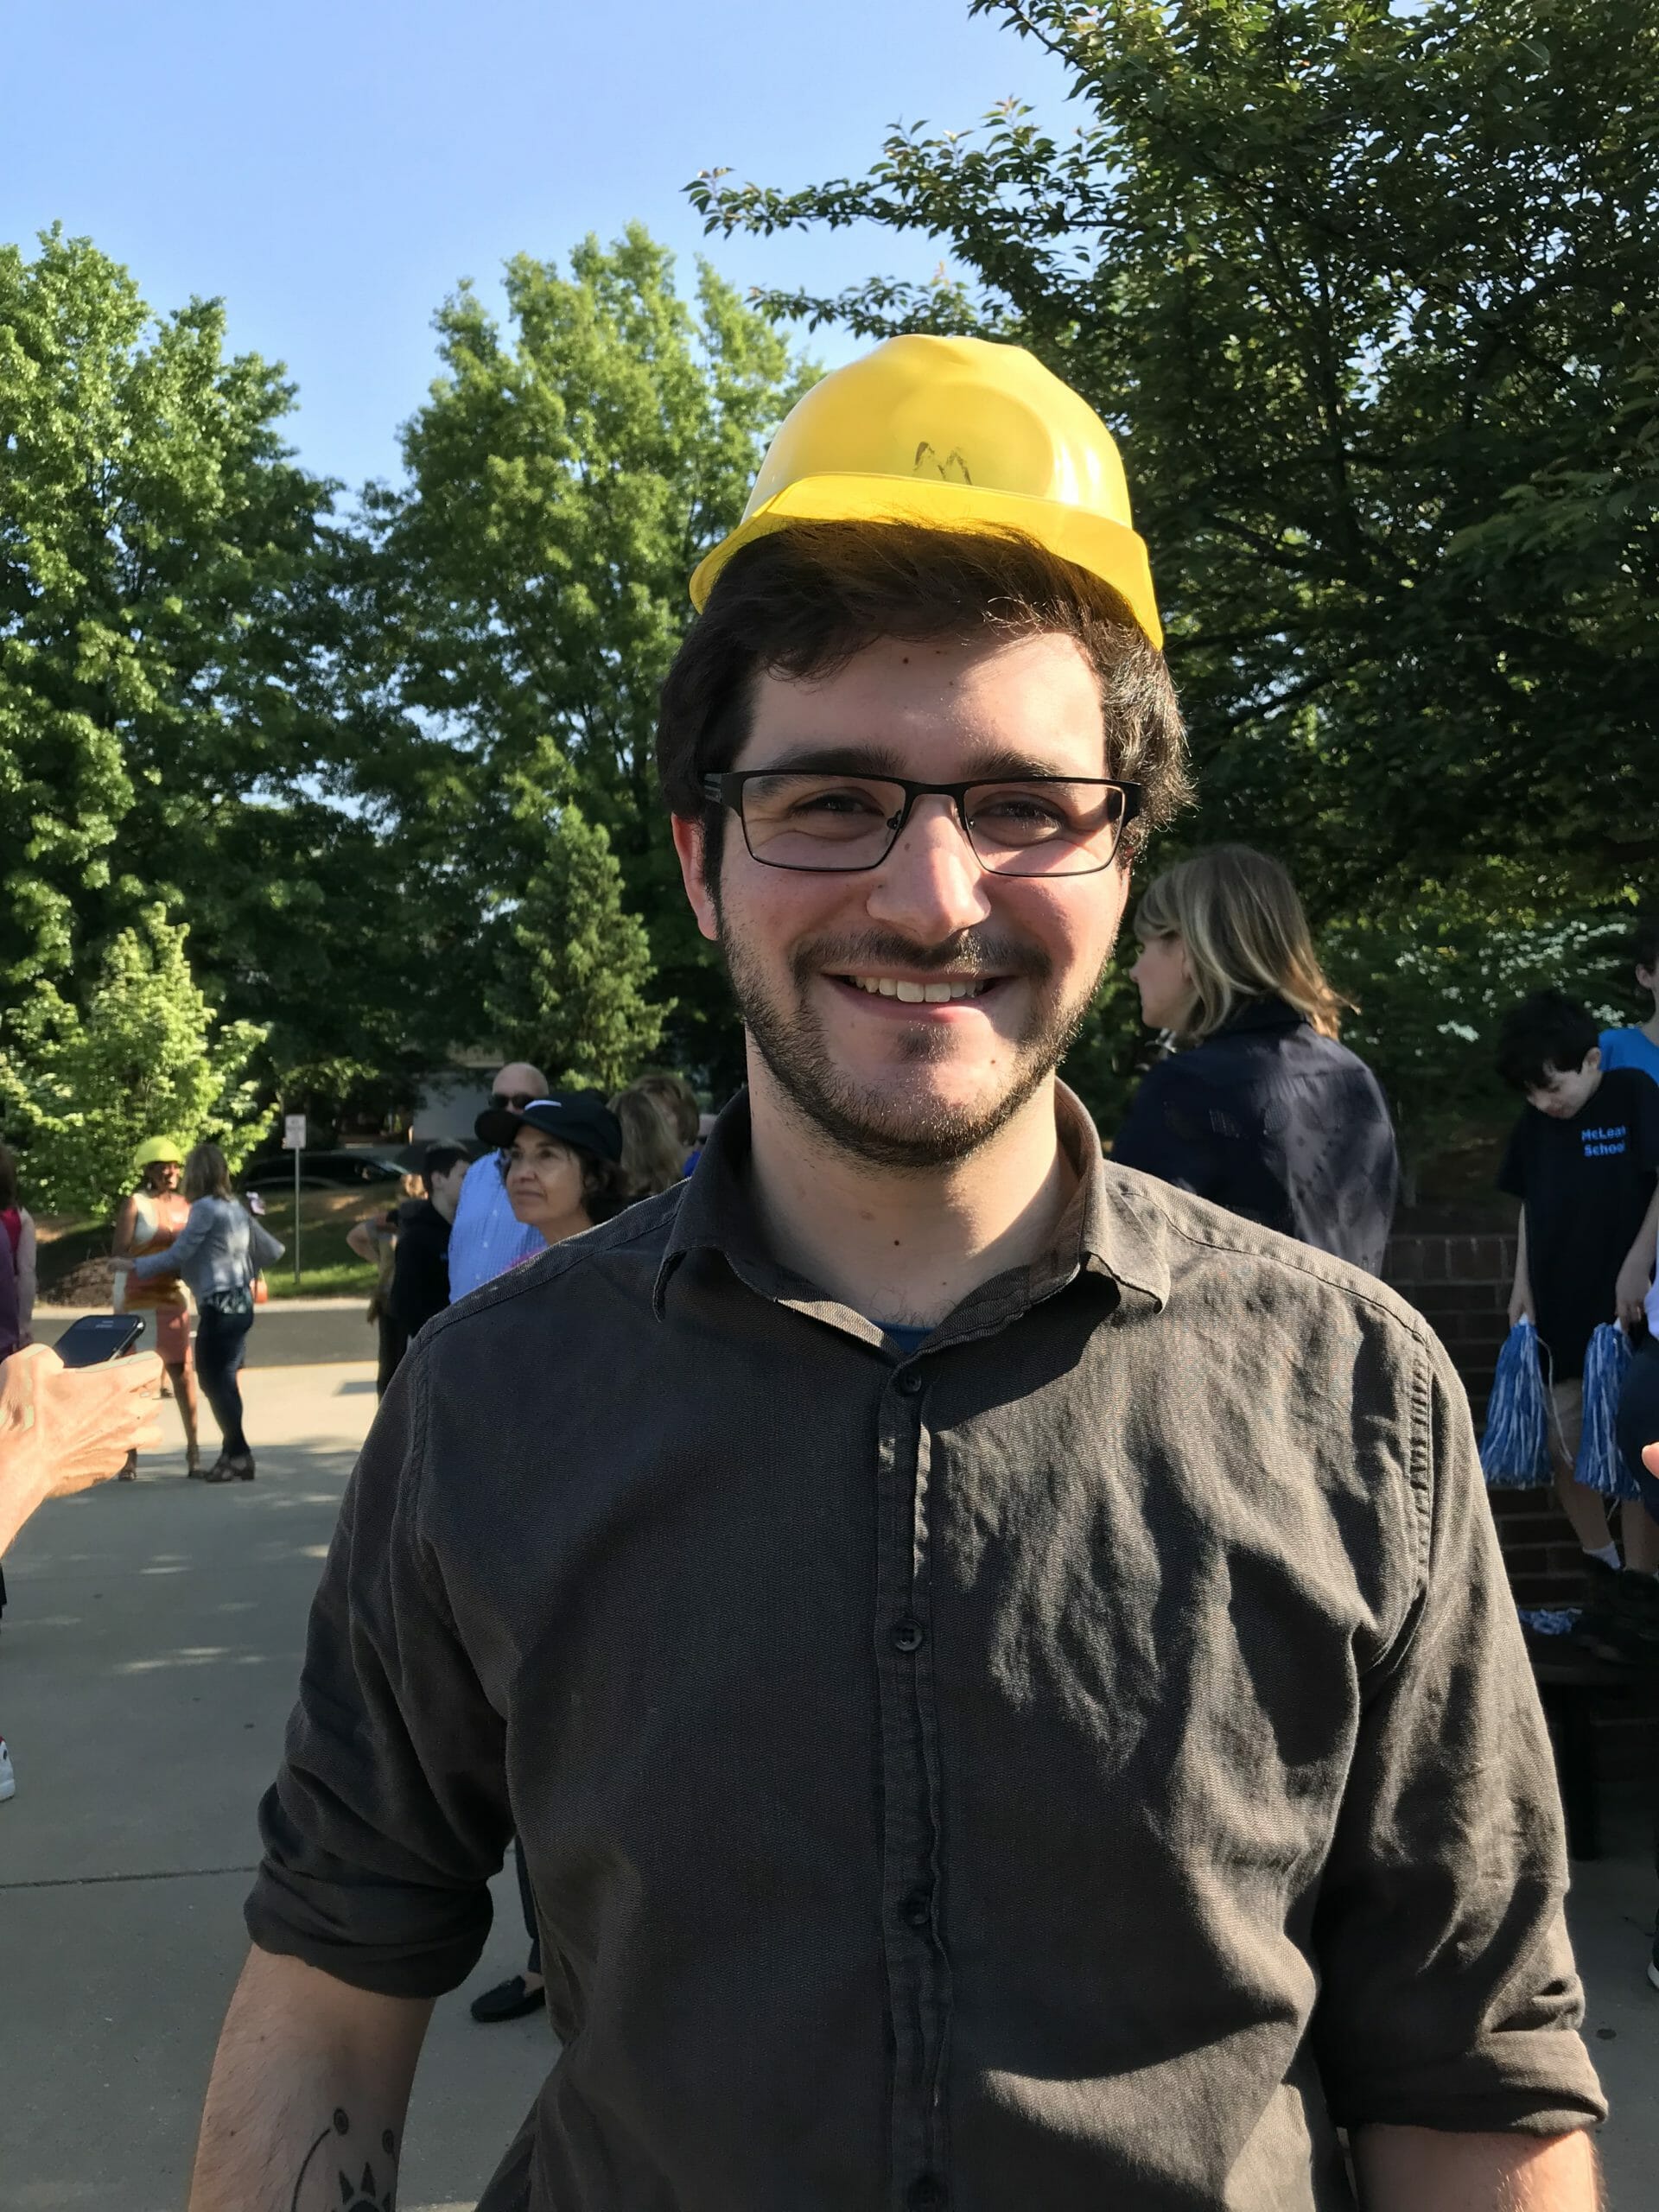 Jamie Tucker, Science Teacher at McLean School, smiles at camera with a yellow hardhat on